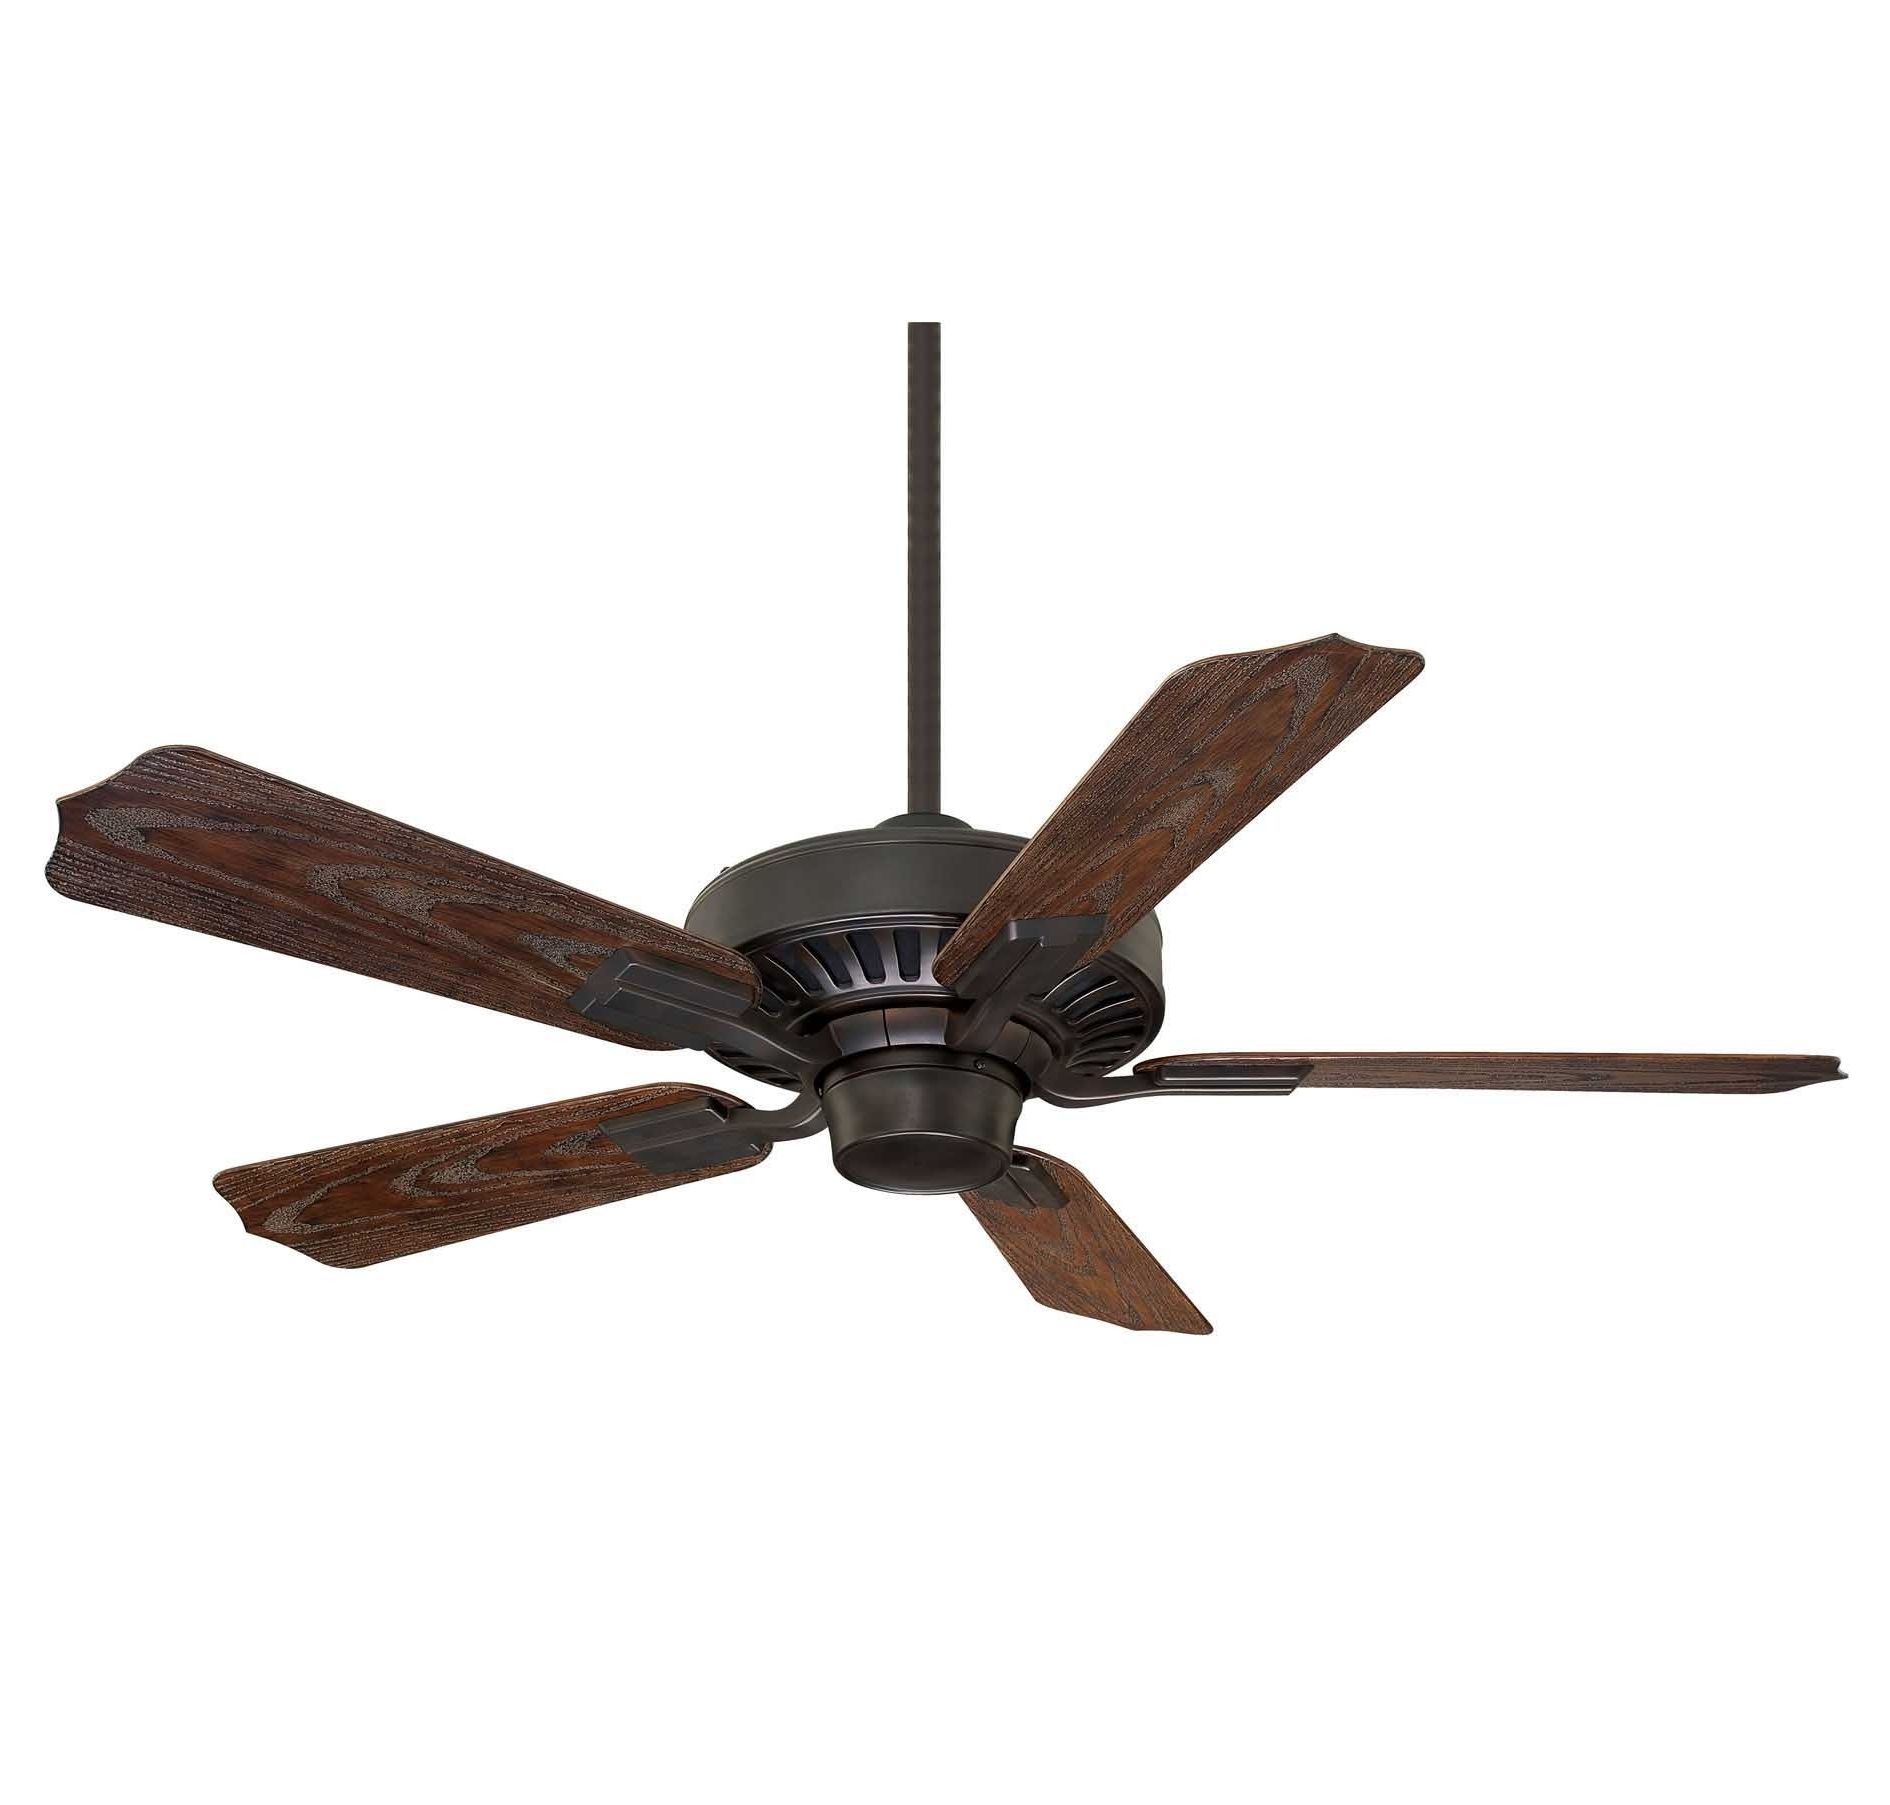 Latest 43 925 5wa 13 Lancer Ii 43 Inch Outdoor Ceiling Fansavoy House Throughout Outdoor Ceiling Fans With Covers (View 19 of 20)